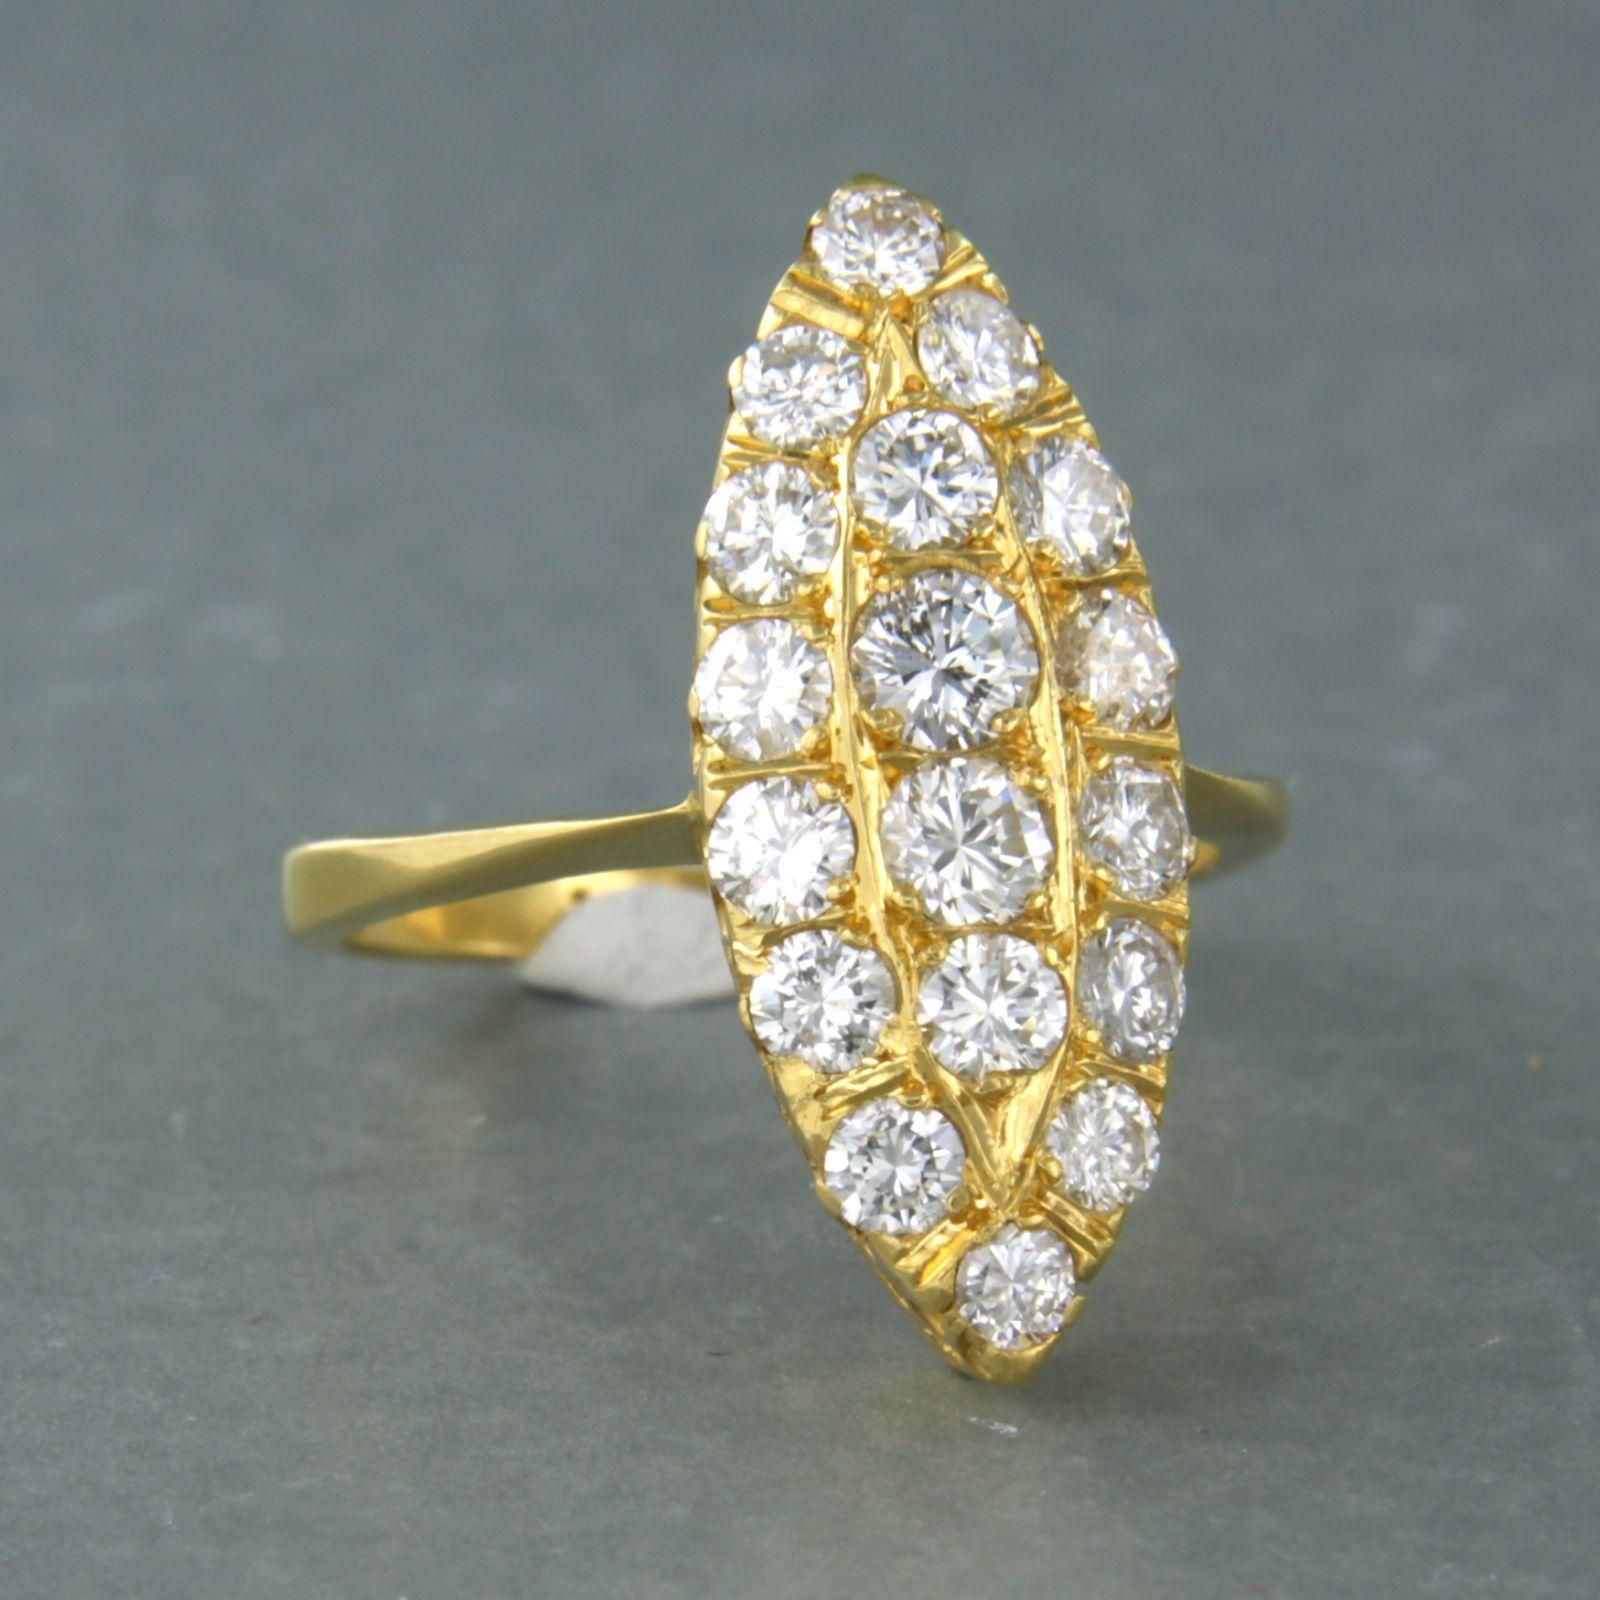 Brilliant Cut Ring with diamonds up to 1.35ct - 20k gold For Sale